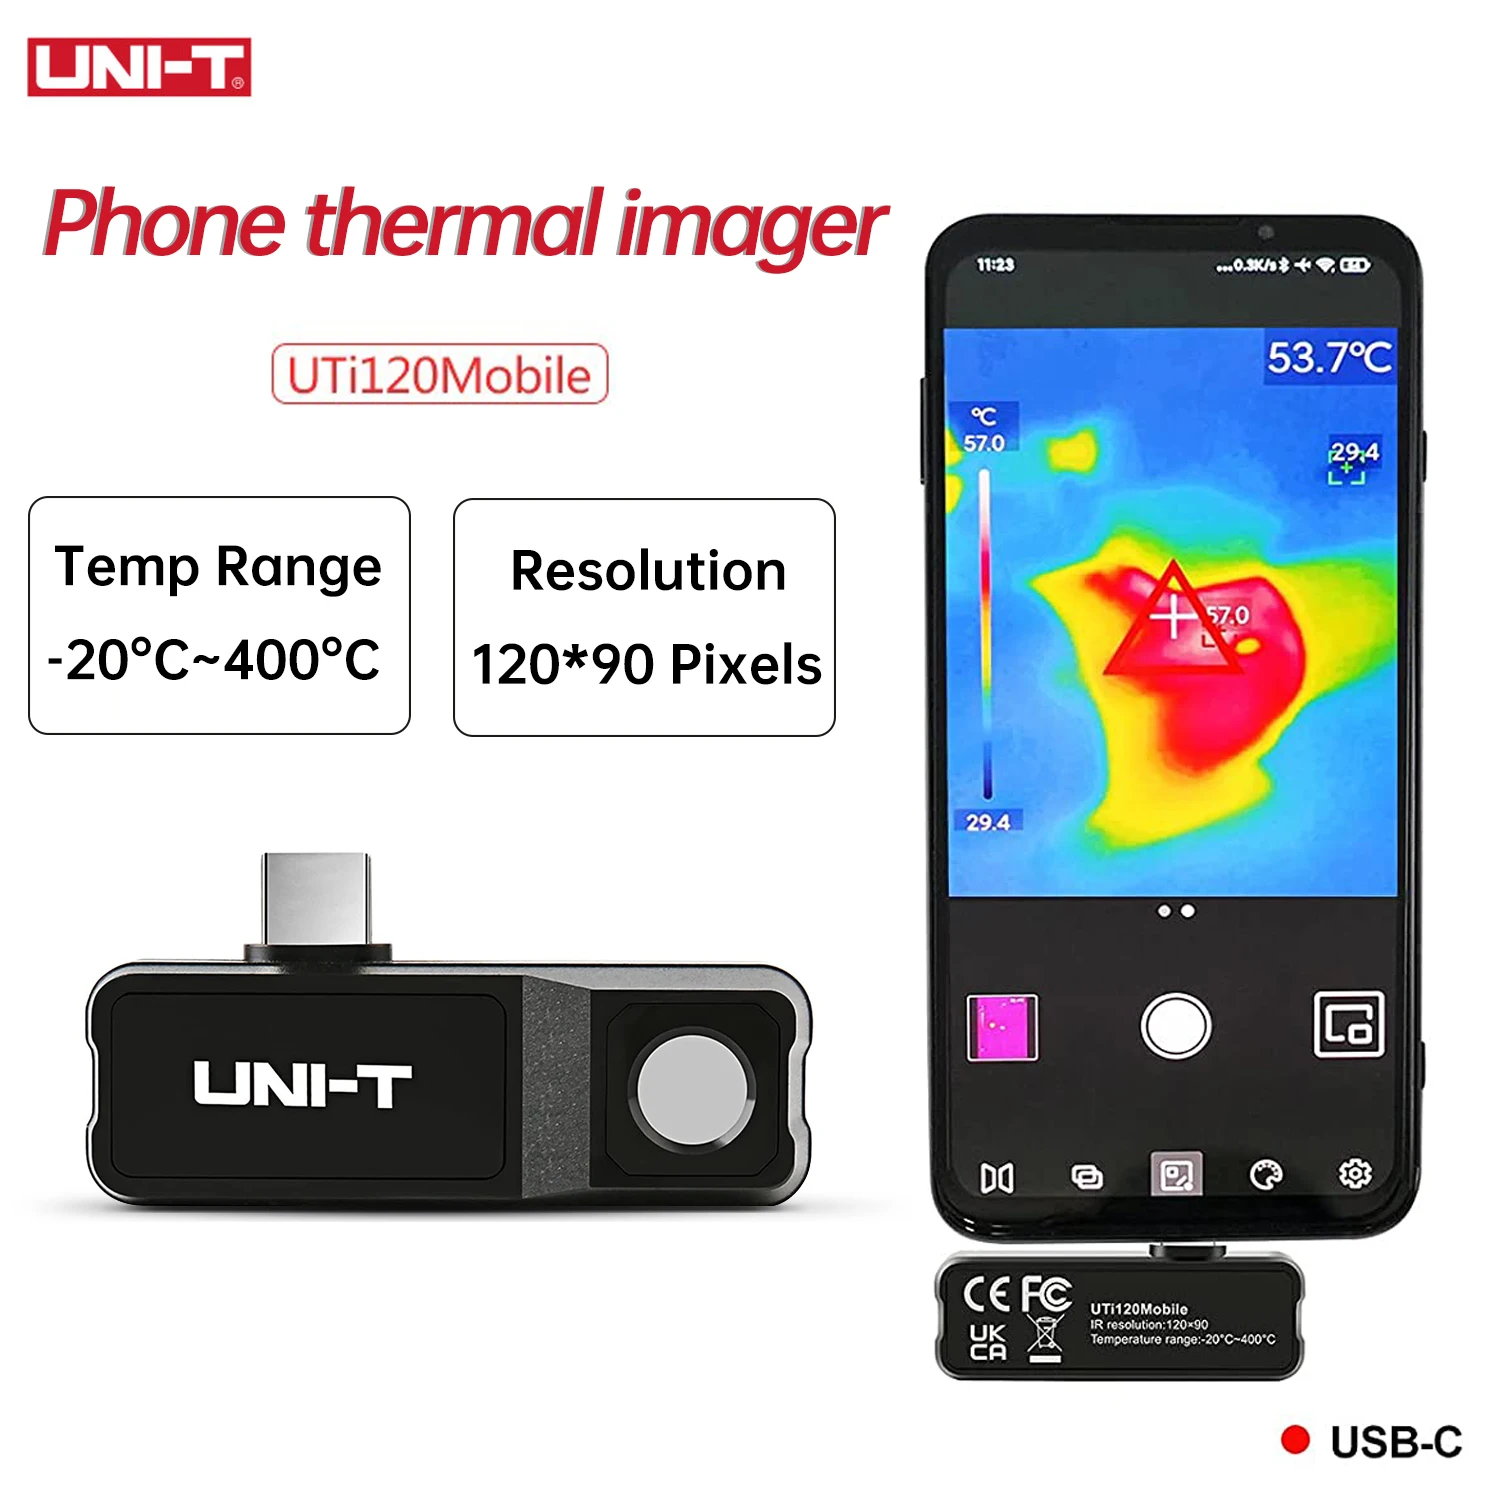 UNI-T Thermal Camera Mobile Phone Thermal Imager for Phone for Android Type-C Detect Water Pipe Floor Heating UTi120